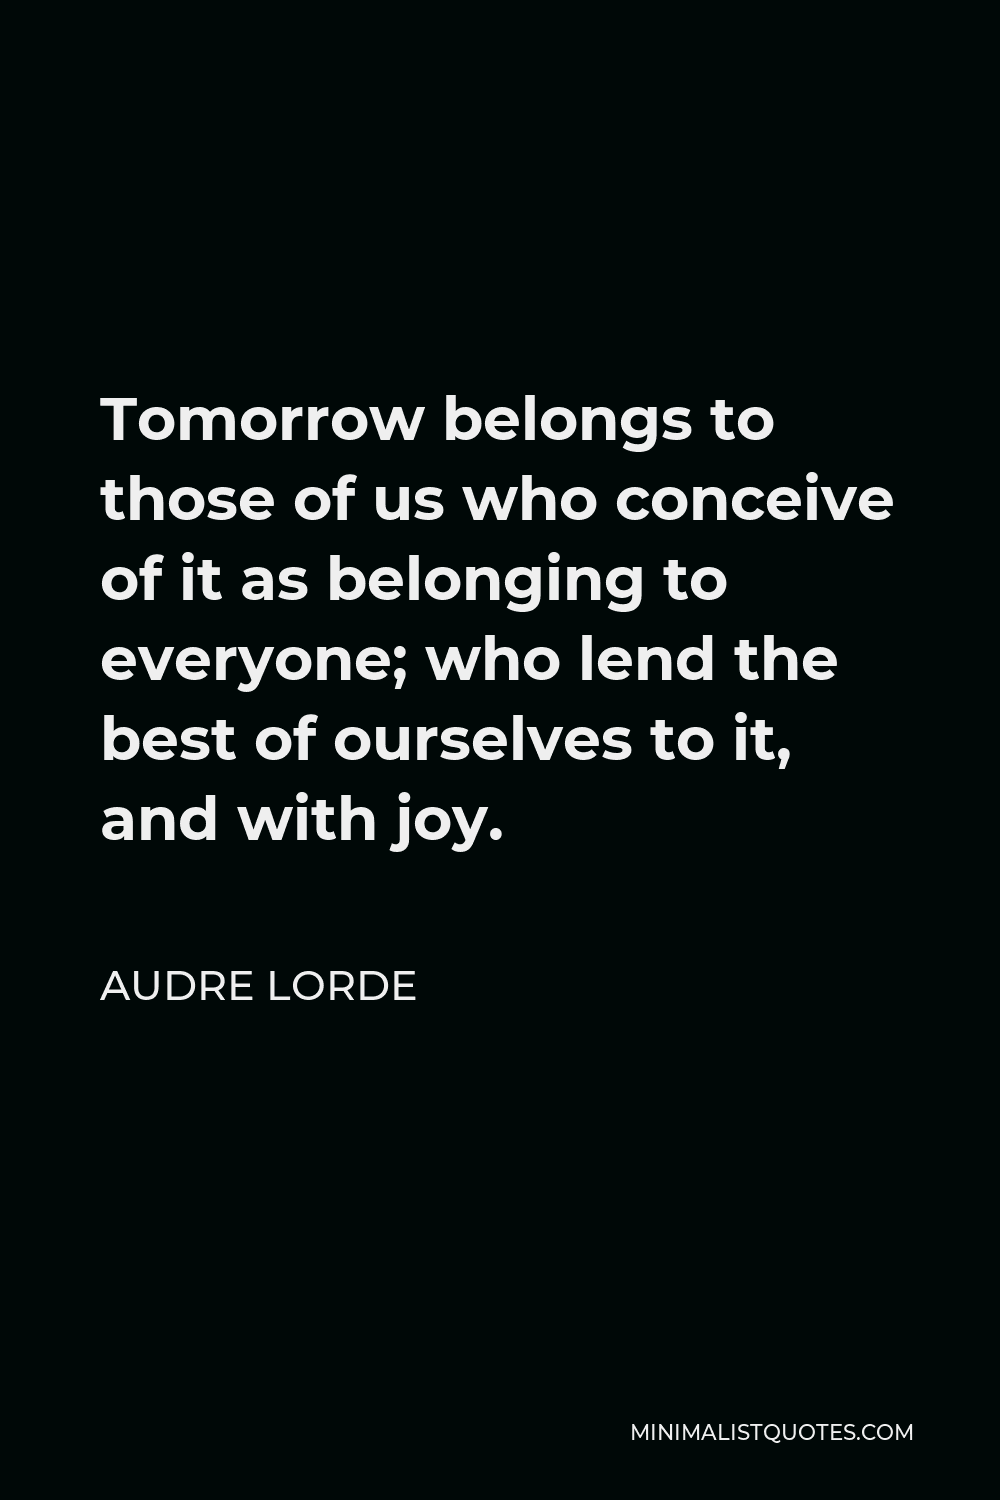 Audre Lorde Quote - Tomorrow belongs to those of us who conceive of it as belonging to everyone; who lend the best of ourselves to it, and with joy.